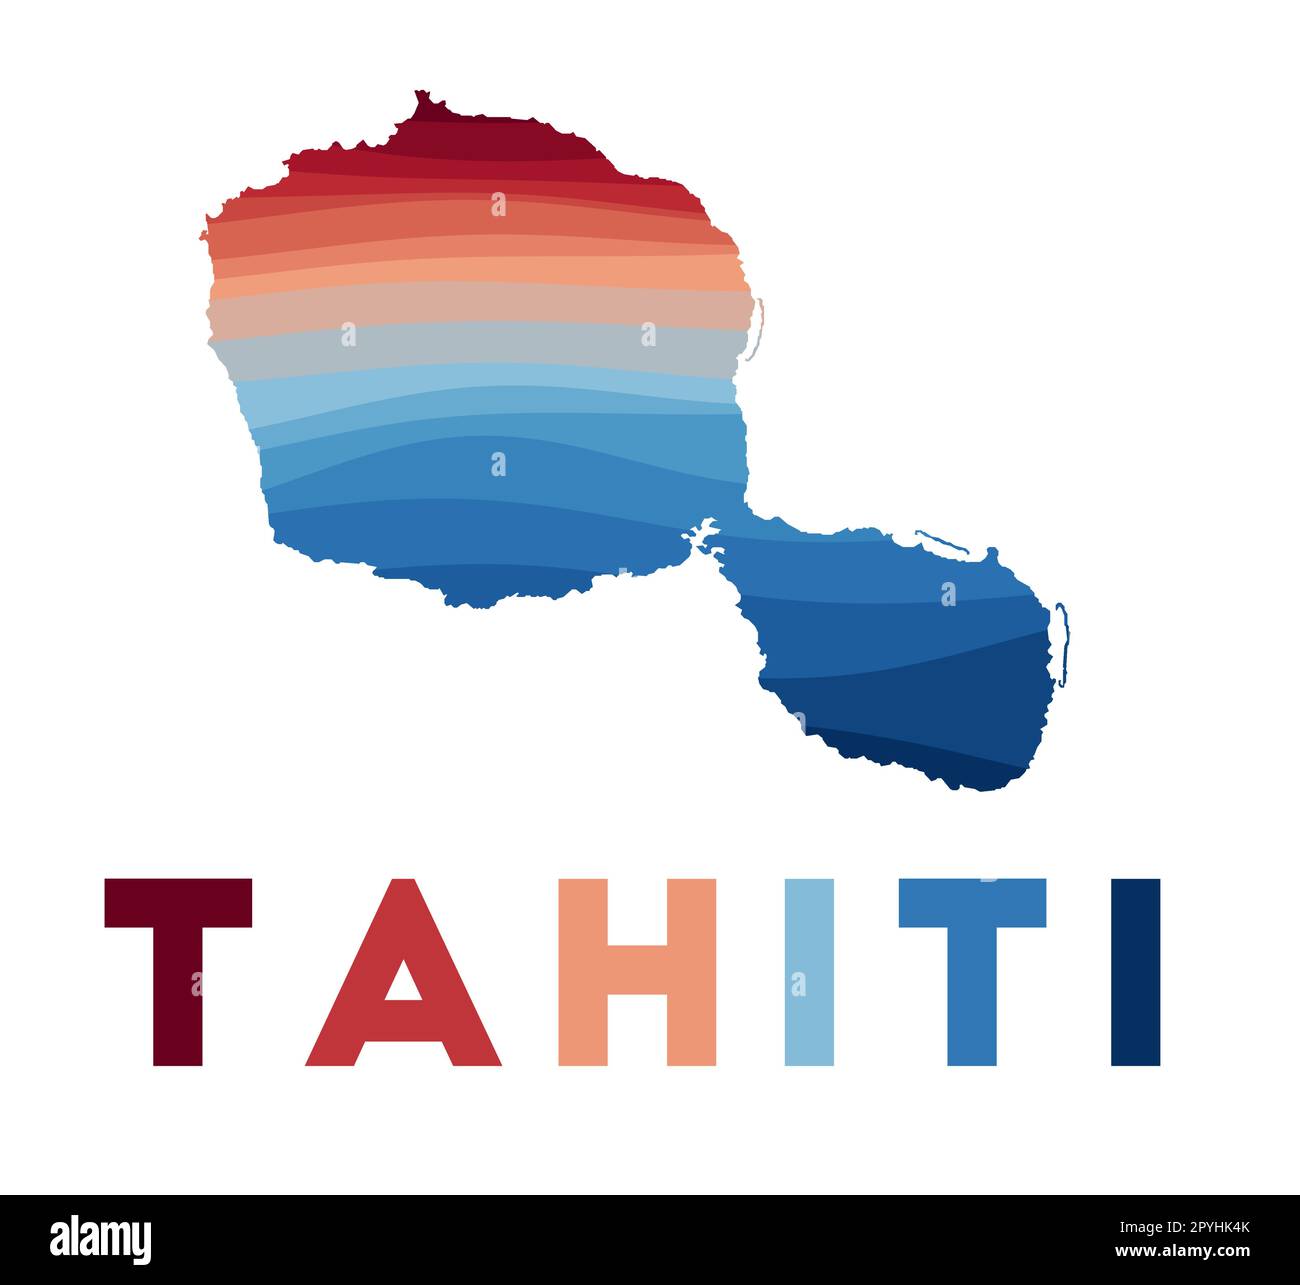 Tahiti map. Map of the island with beautiful geometric waves in red blue colors. Vivid Tahiti shape. Vector illustration. Stock Vector